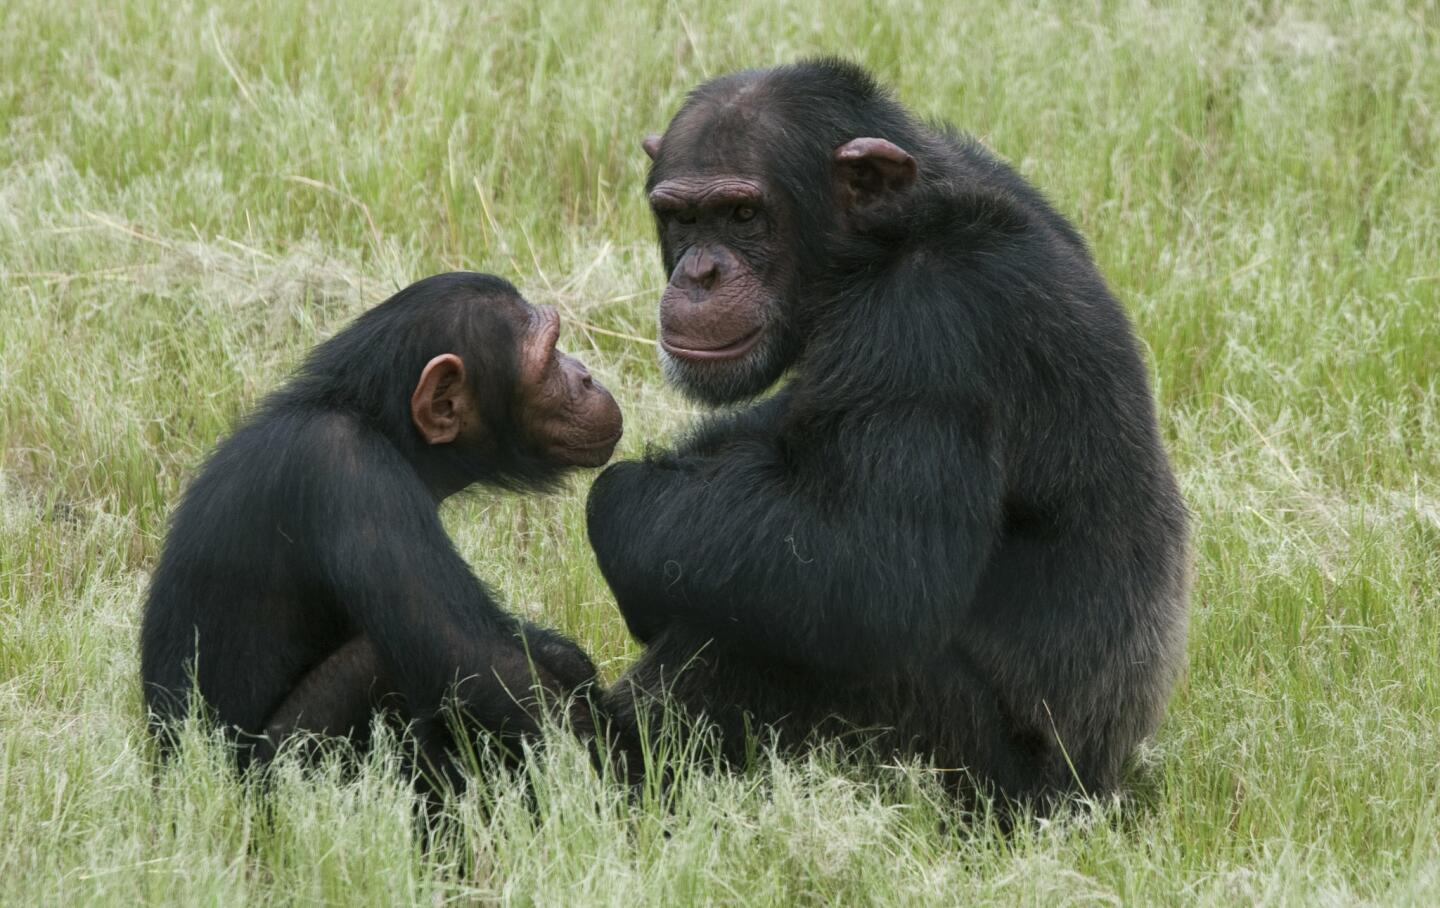 The evolutionary and biological seeds for today's 90-mph fastball were sewn about 2 million years ago, when a variety of evolved anatomical features began to coalesce in early humans, Harvard scientists determined. Our chimp cousins lack most of these anatomical features.